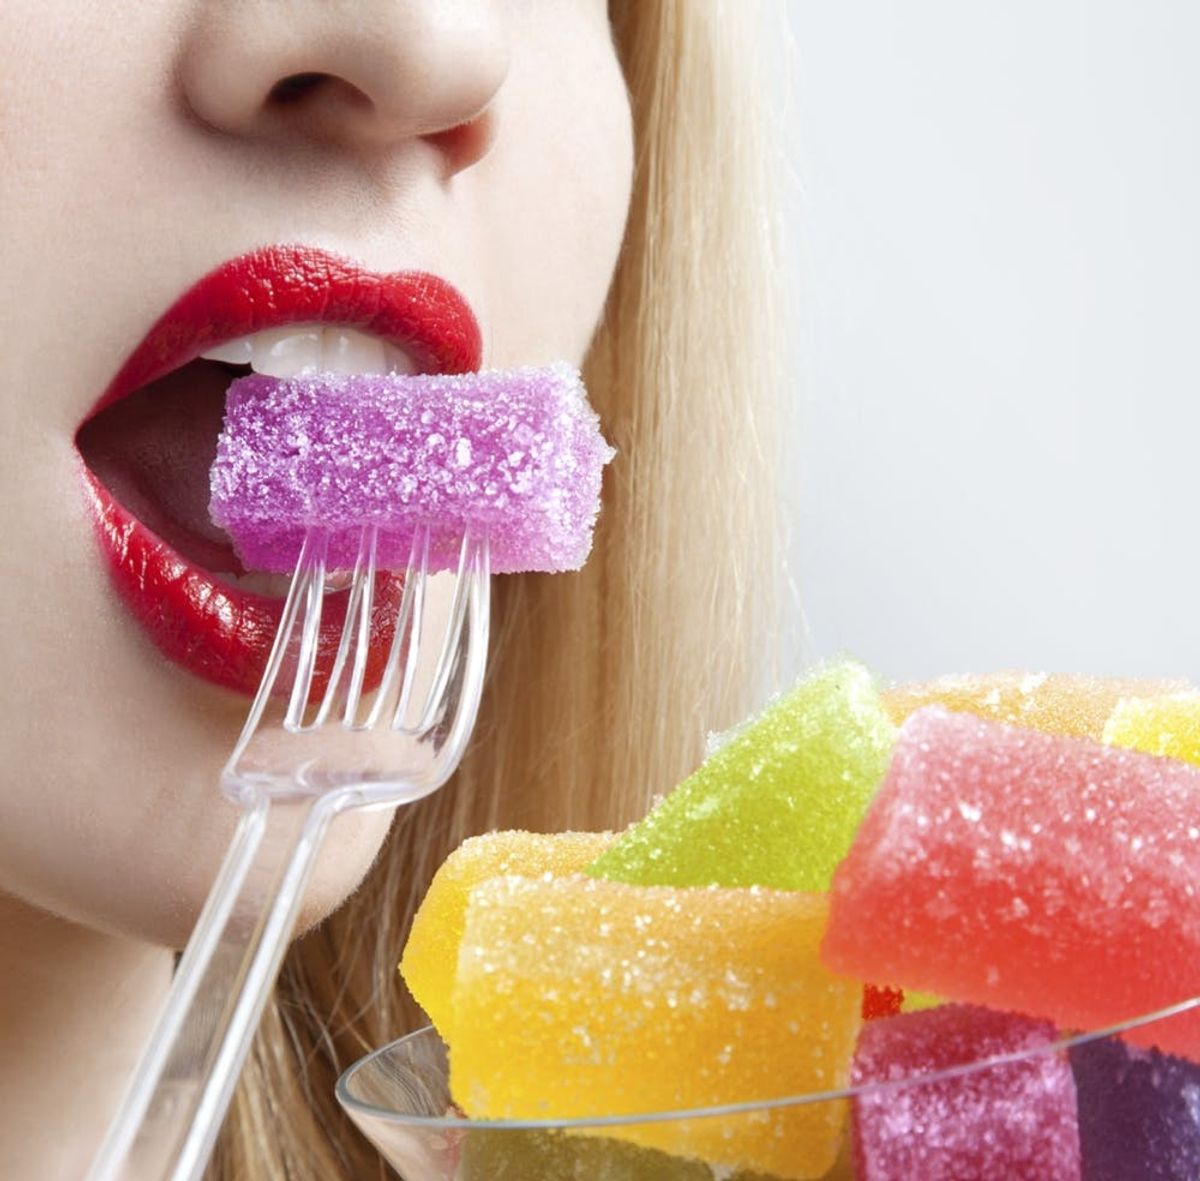 Collagen Candy Might Be the Secret to Wrinkle-Free Skin